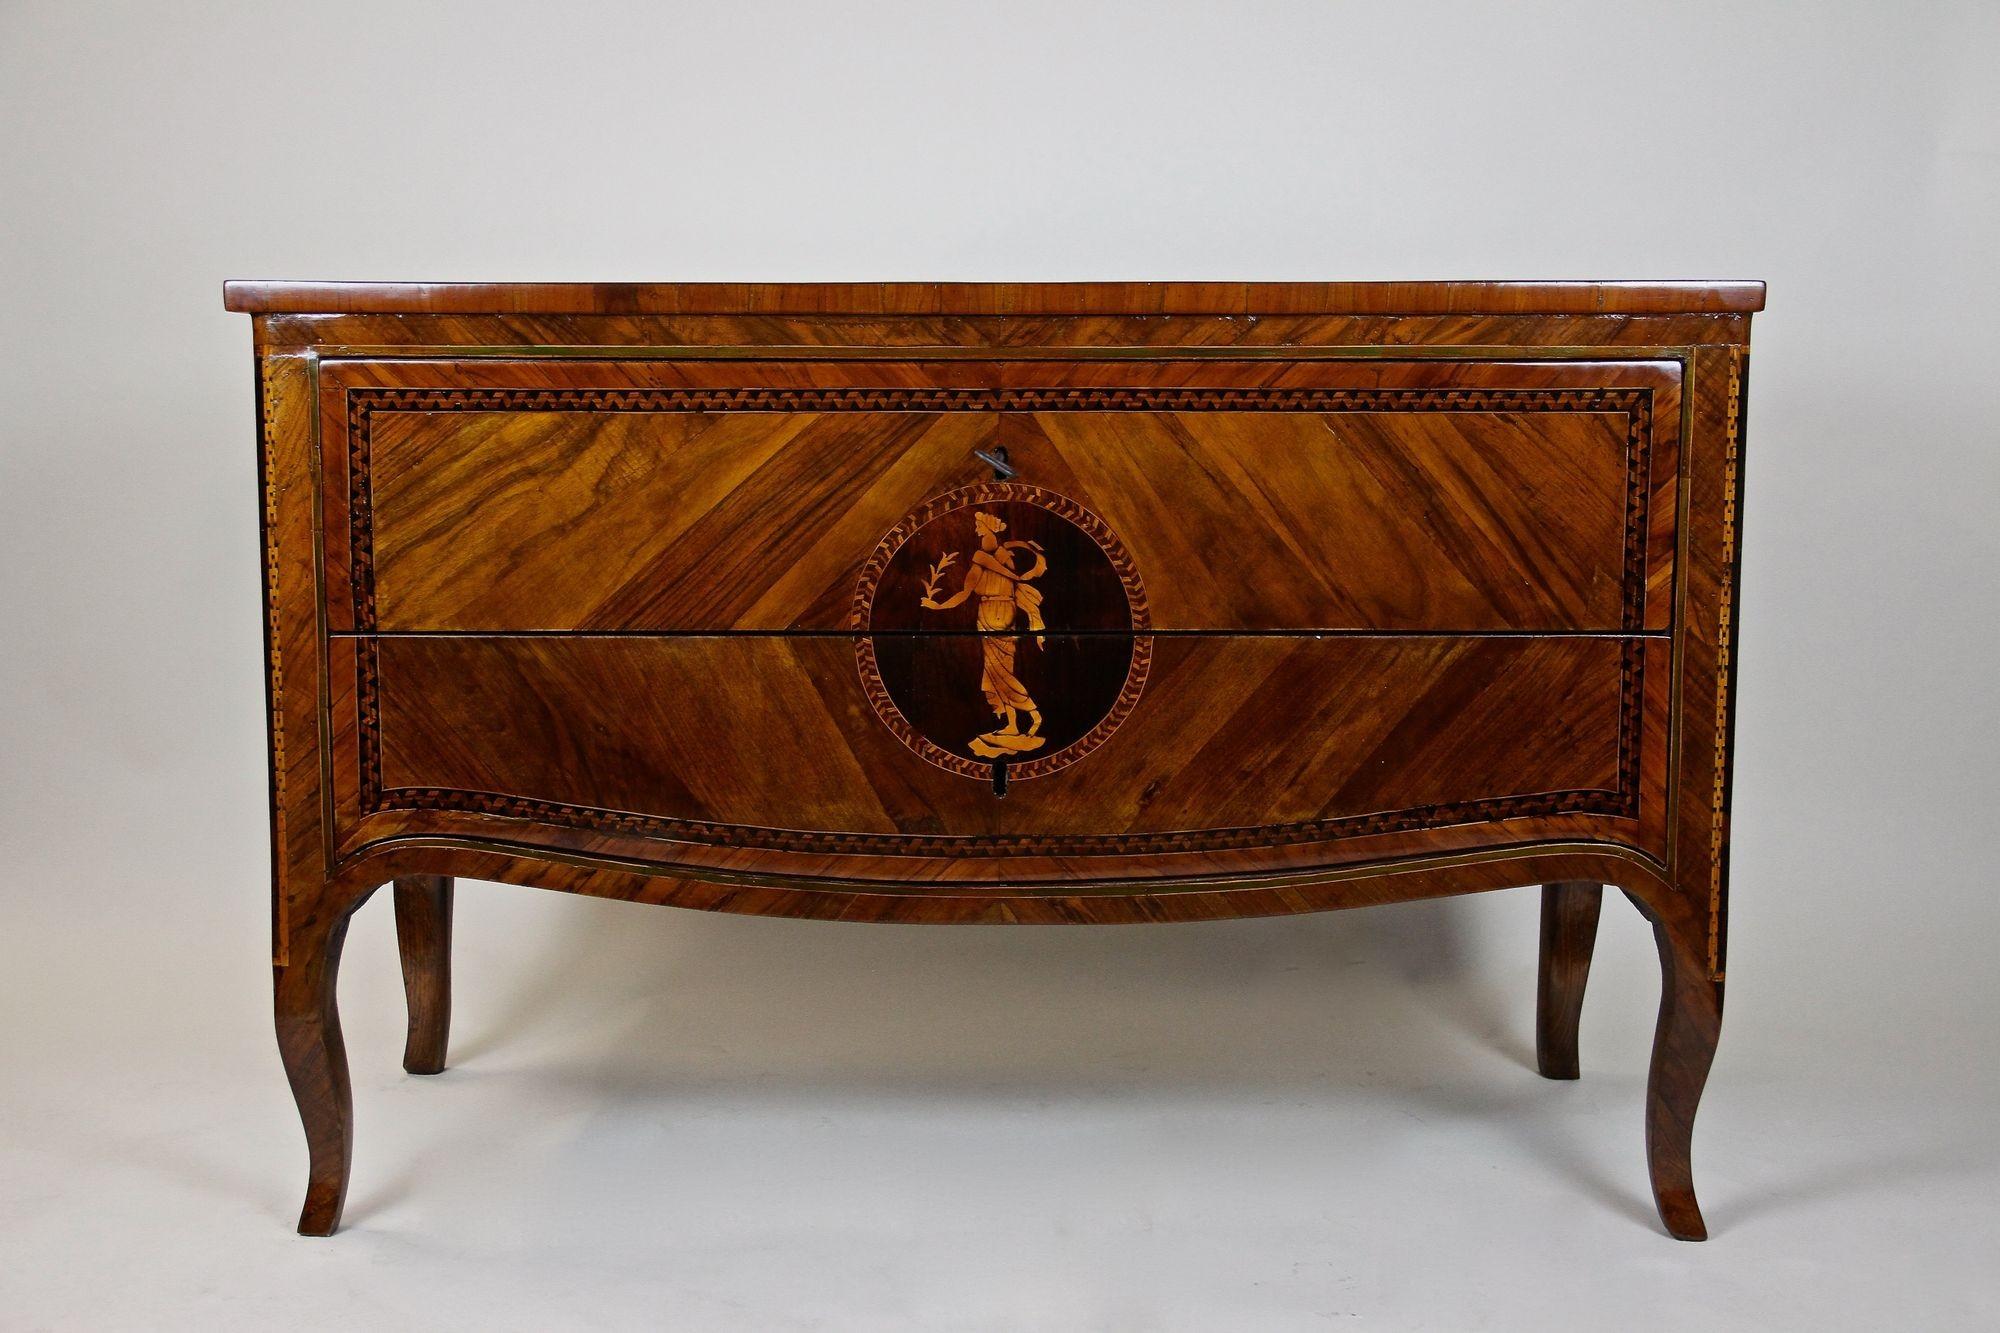 An absolute masterpiece of mid 18th century Italian craftsmanship is this unbelievable artfully crafted marquetry chest of drawers out of Milan. Made around 1760 with highest attention to details, this one of a kind museum-quality commode is not